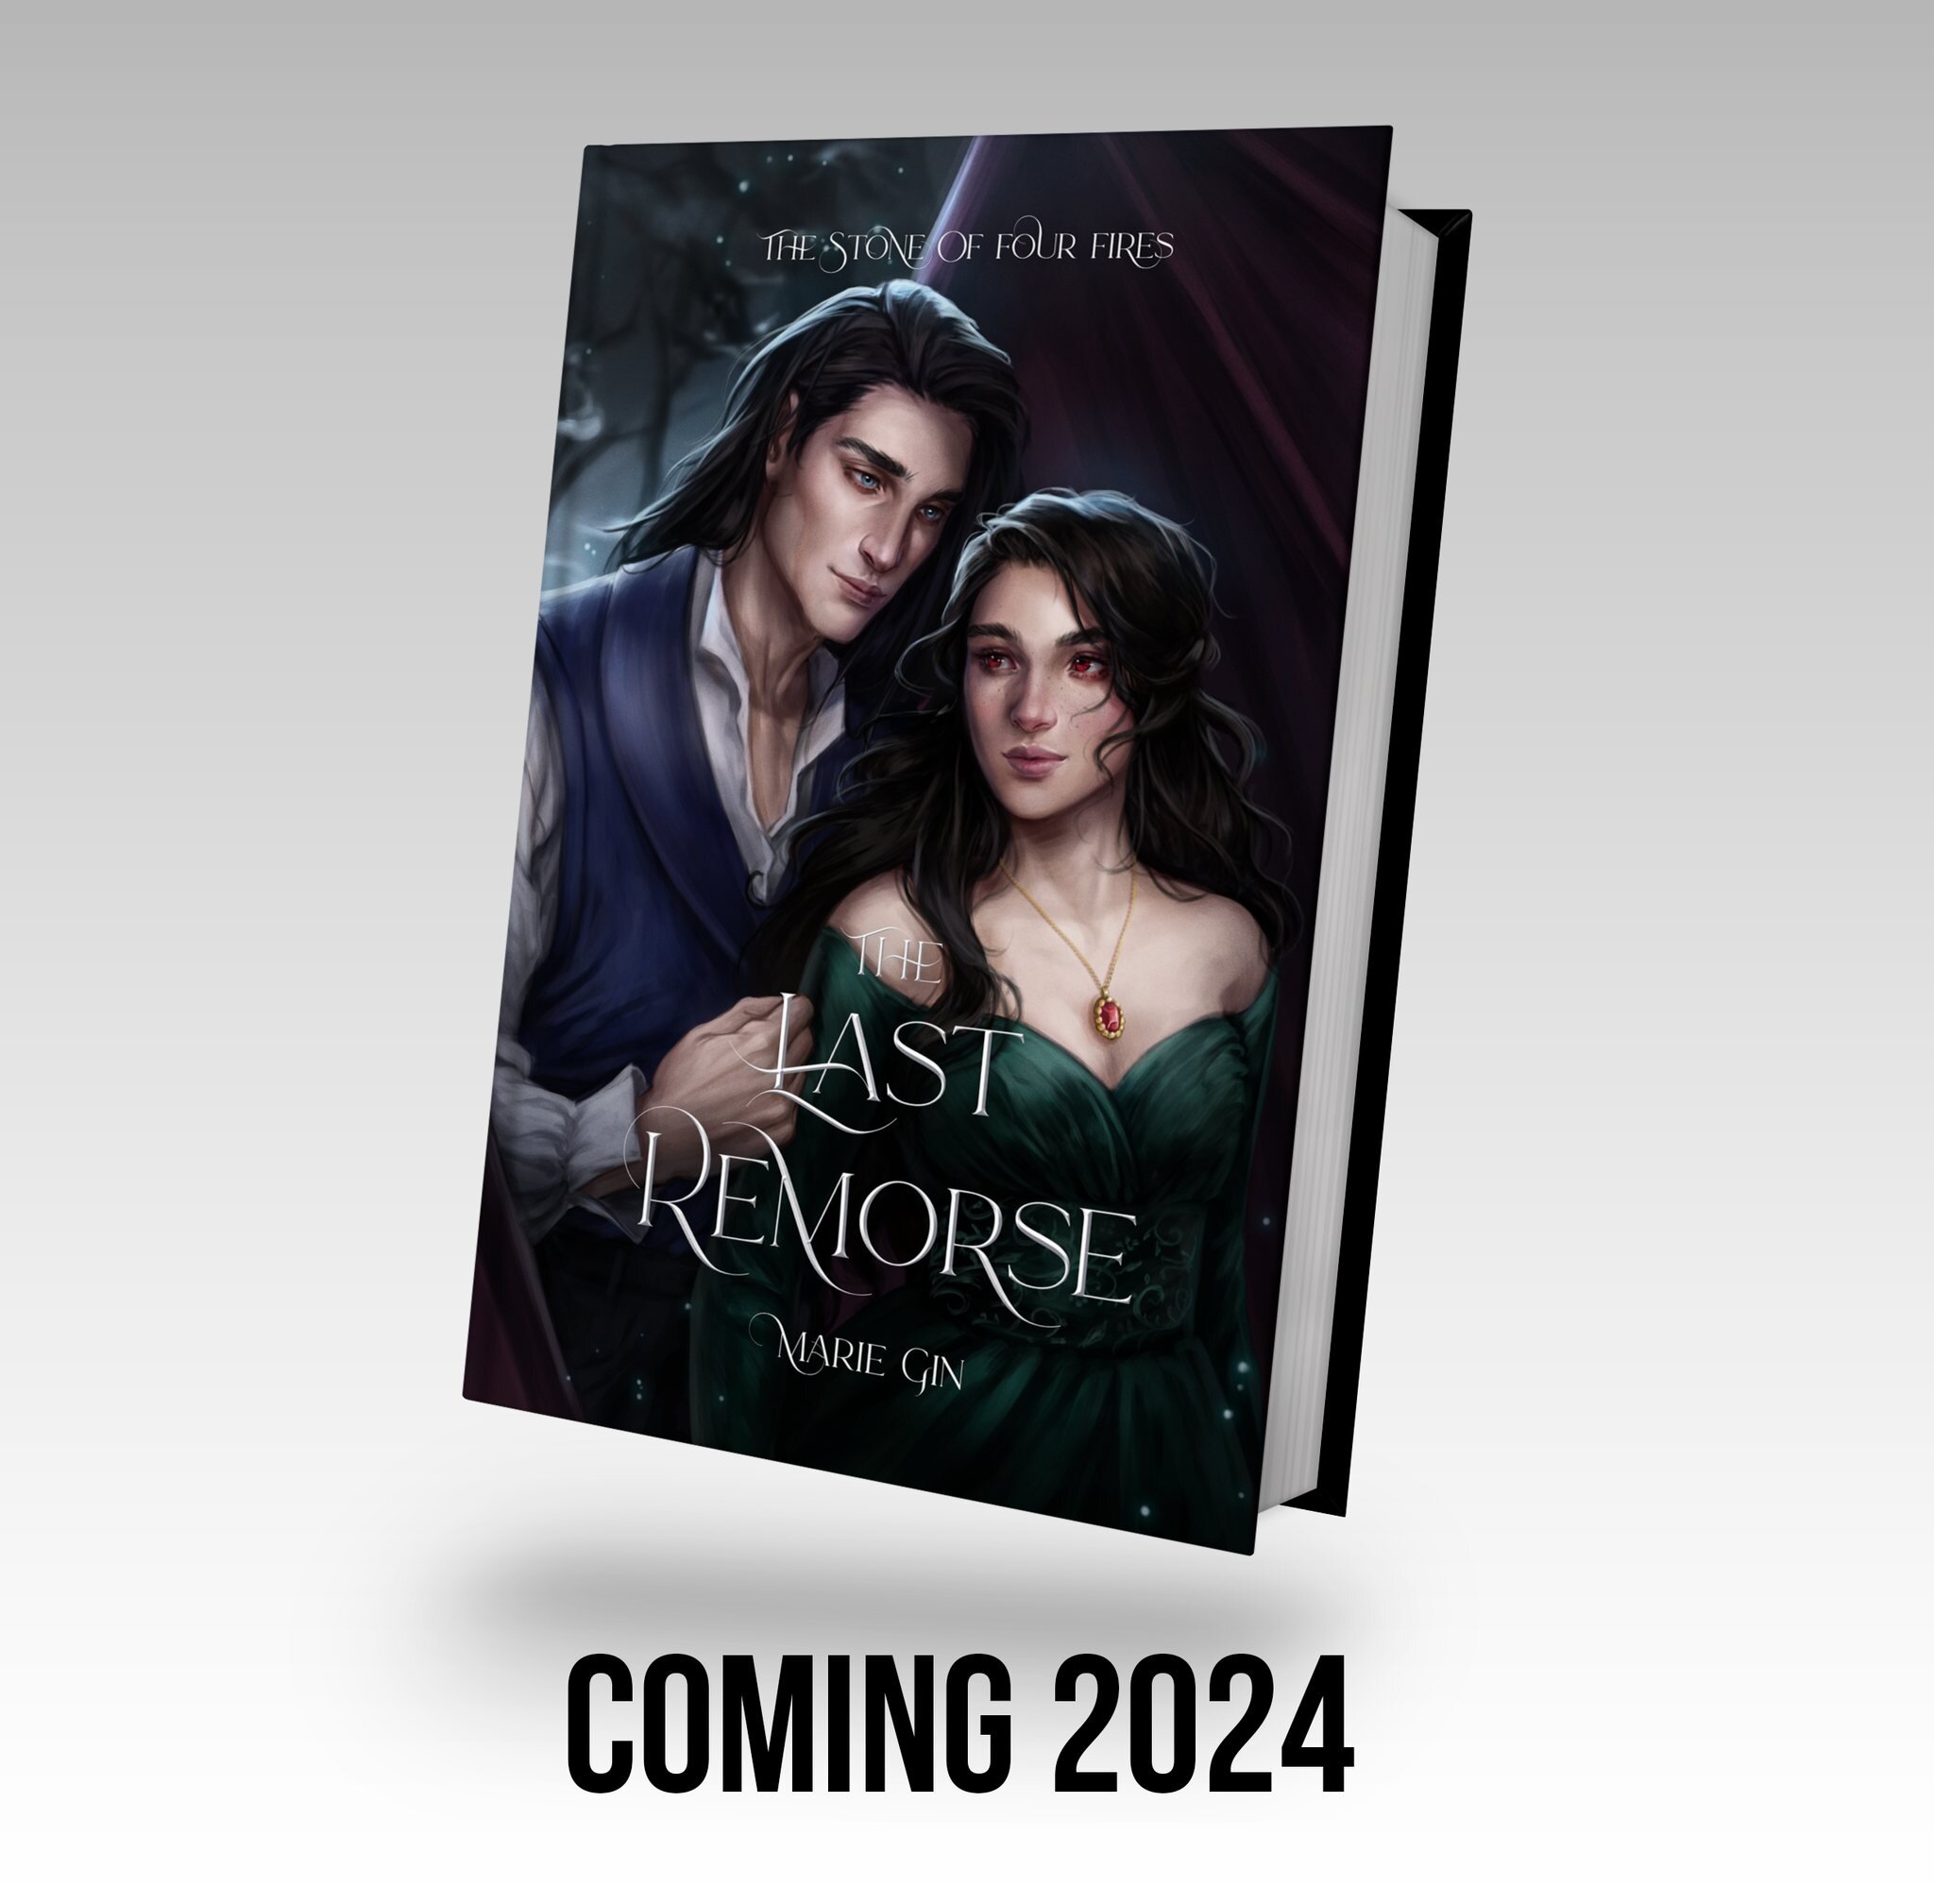 COVER REVEAL - The long wait won't seem as long anymore! The second book of my 'The Stone of Four Fires' series will be coming out sometime next year, hopefully towards the start! It's called 'The Last Remorse' and will follow Elena's story, ten year